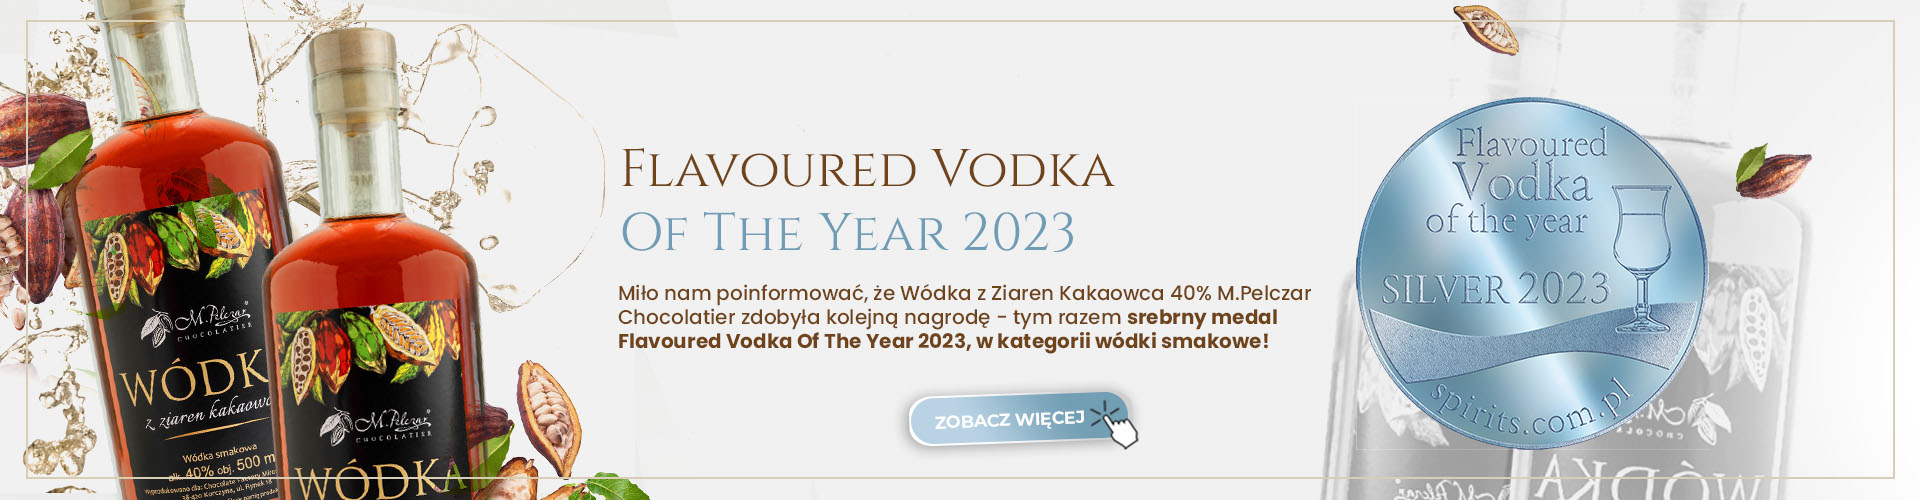 Flavoured Vodka Of The Year 2023